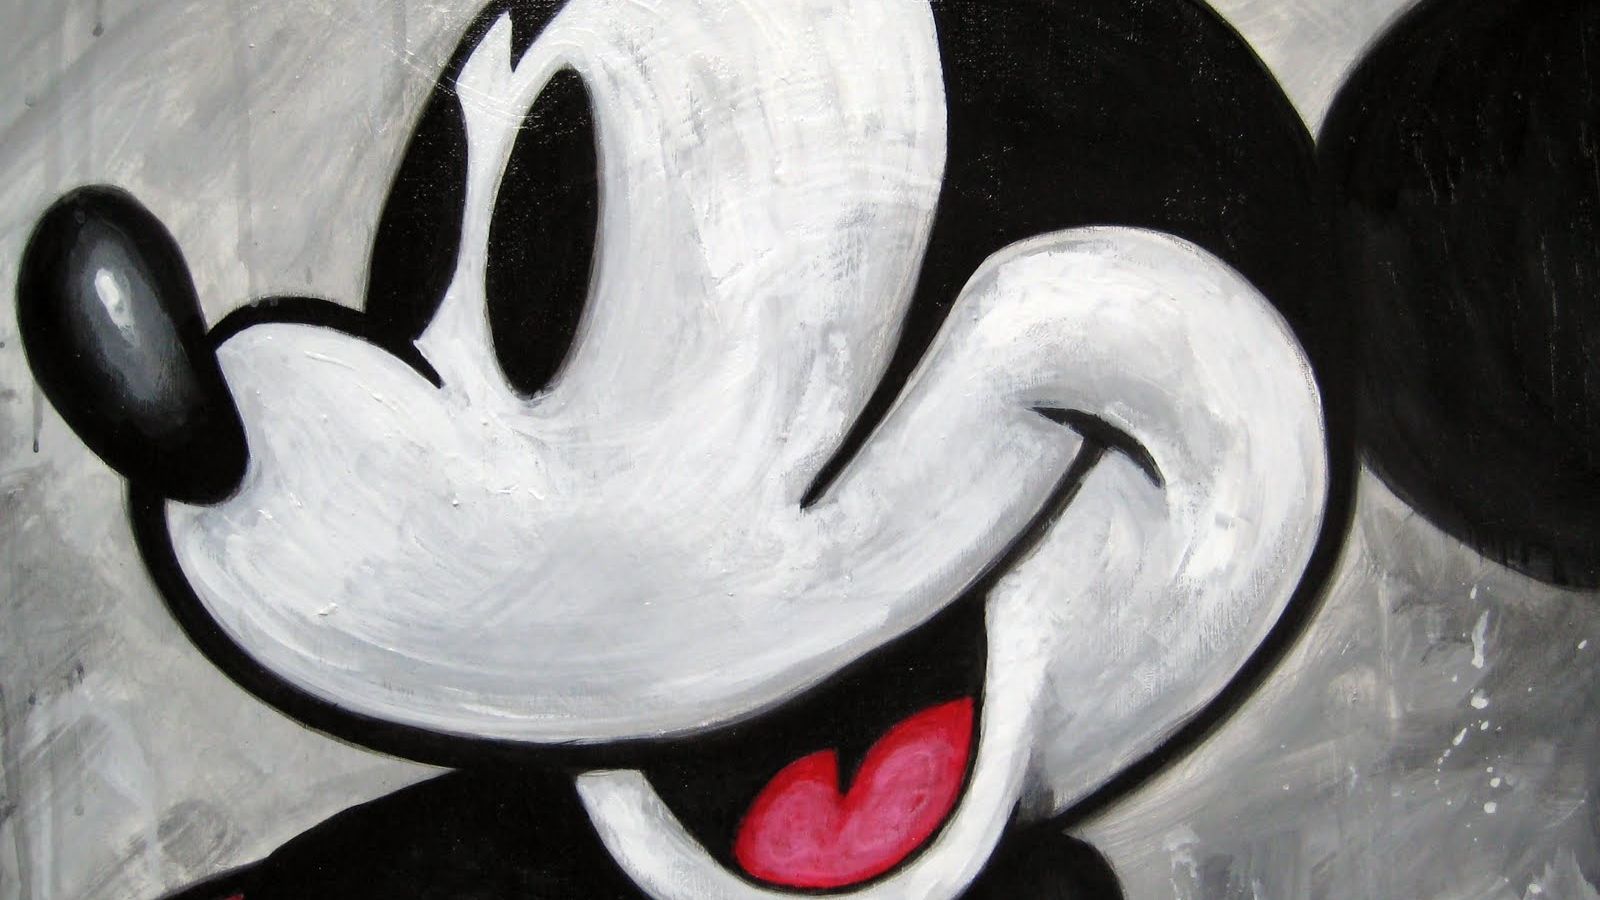 old mickey mouse cartoons in black and white wallpaper